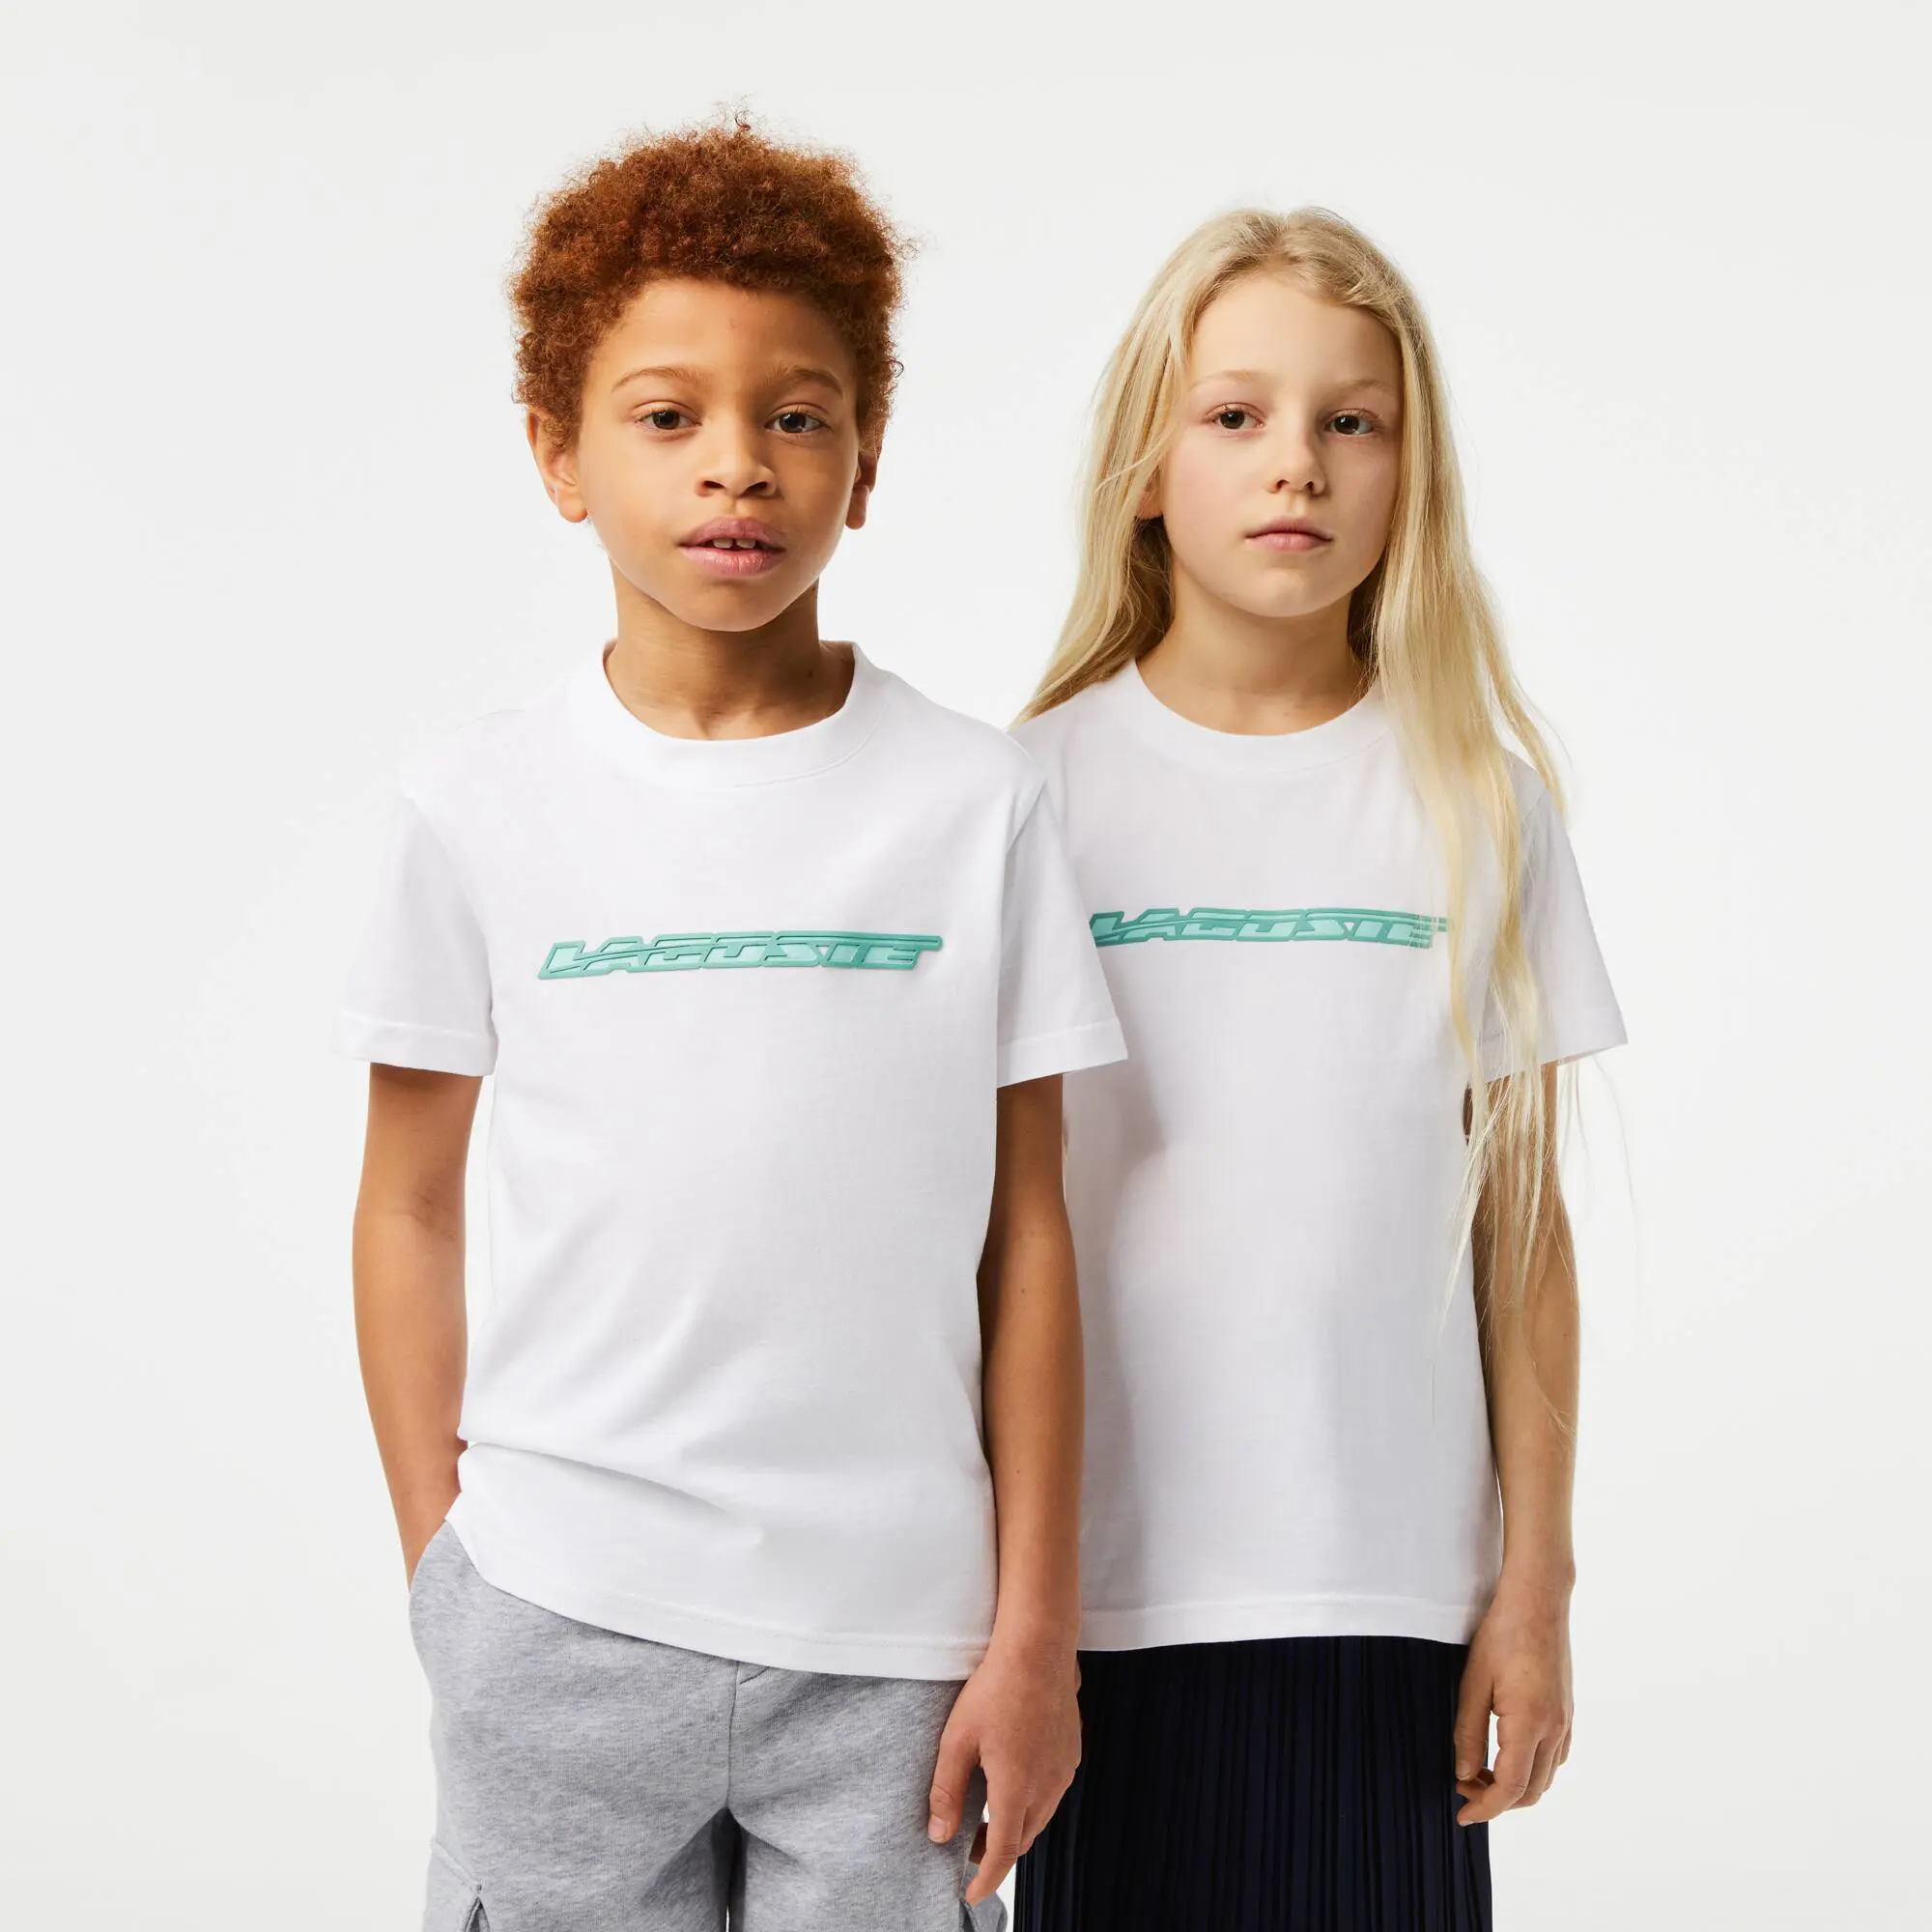 Lacoste Kids’ Lacoste Cotton Jersey T-Shirt with Contrast Marking. 1